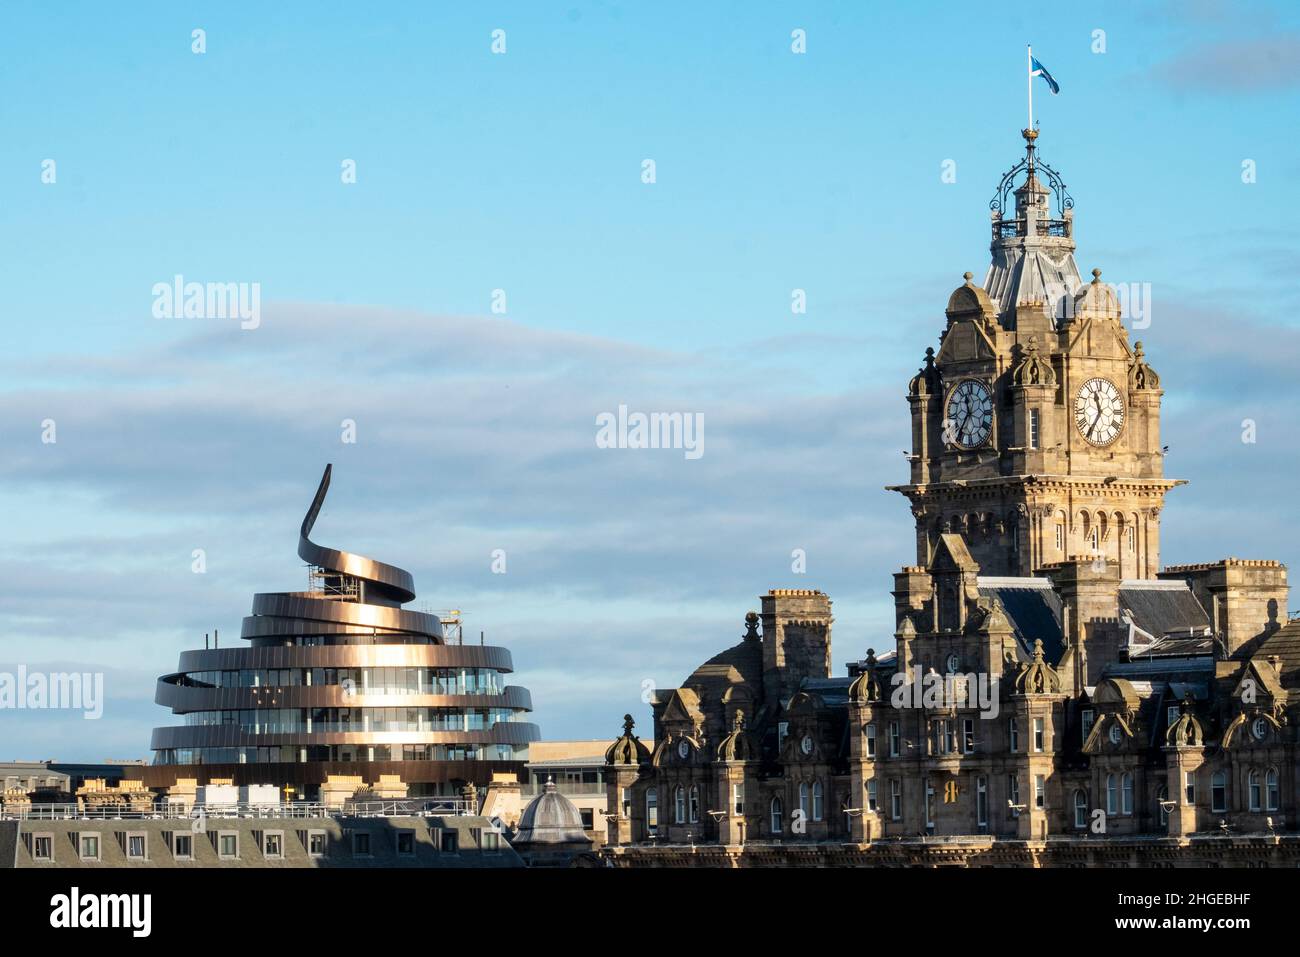 View of the Edinburgh skyline with the new St James centre hotel and the Balmoral hotel clock tower to the right. Stock Photo